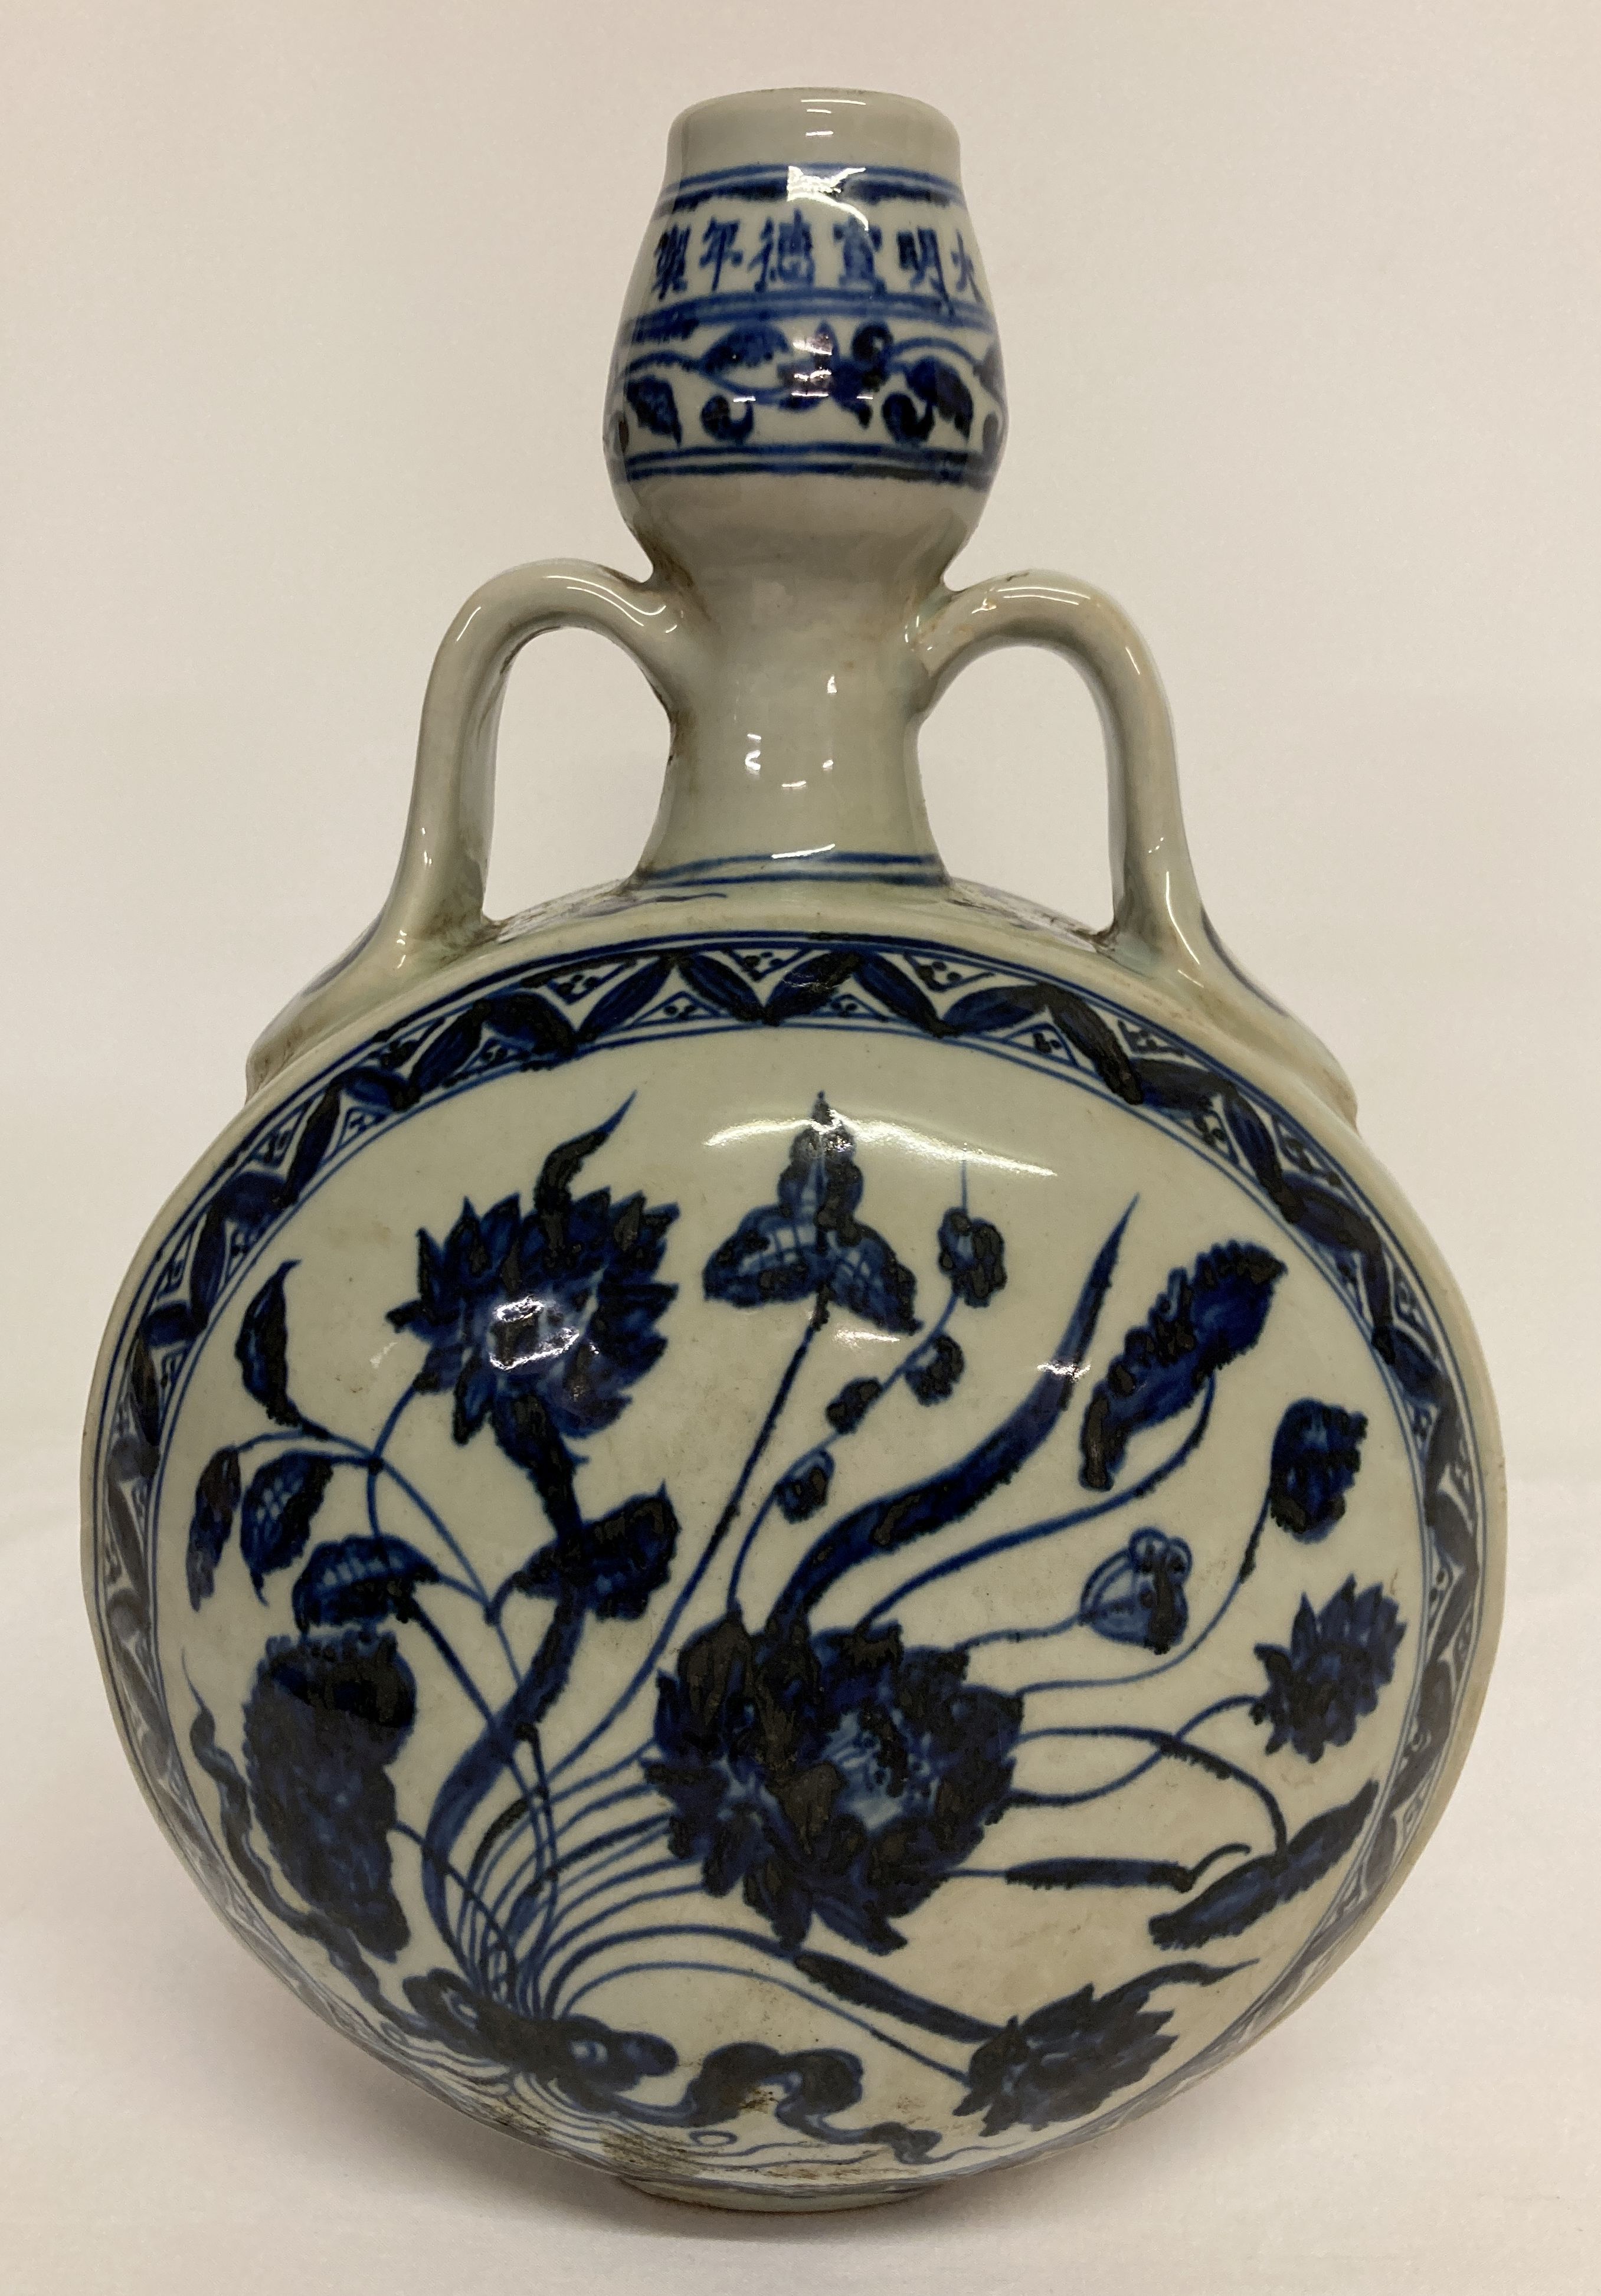 A hand painted blue and white ceramic Chinese 2 handled Moon vase.